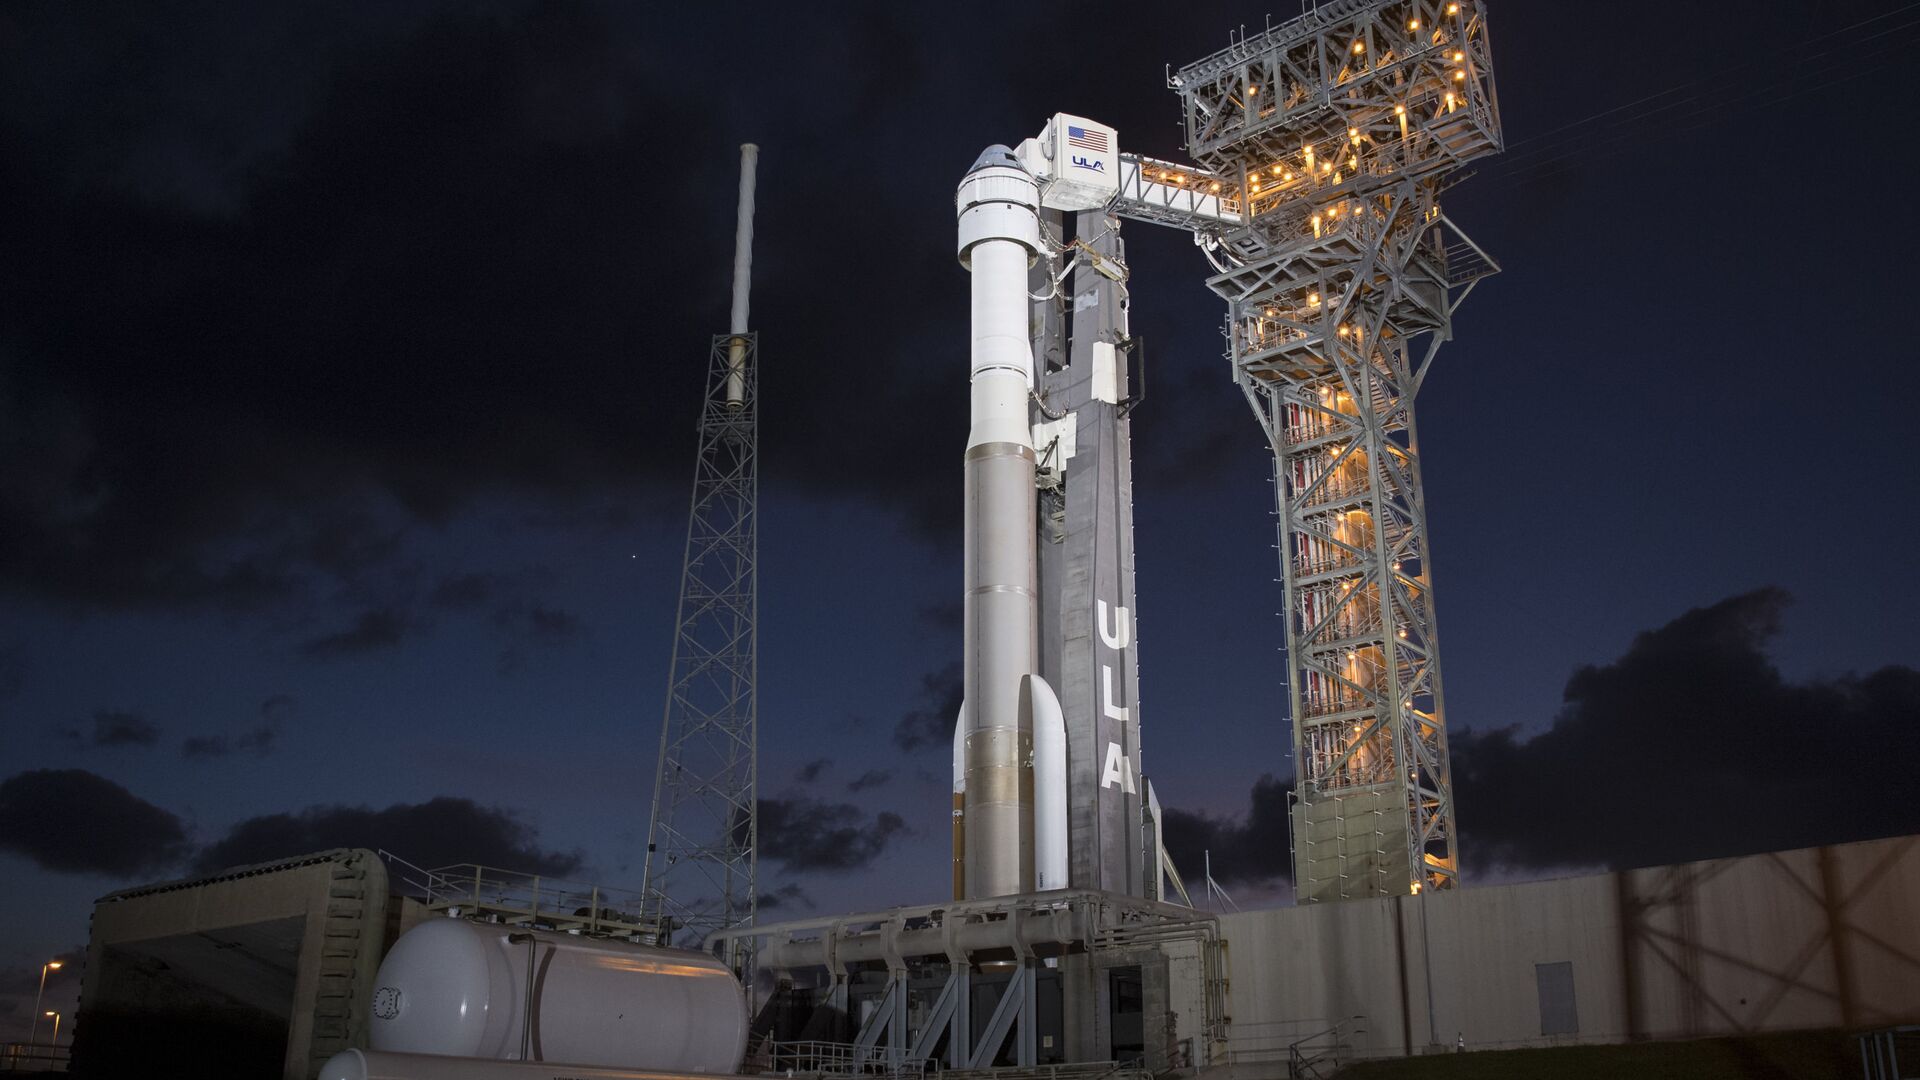 A United Launch Alliance Atlas V rocket with Boeing's CST-100 Starliner spacecraft onboard is seen illuminated by spotlights on the launch pad at Space Launch Complex 41 ahead of the Orbital Flight Test mission, Wednesday, Dec. 18, 2019 at Cape Canaveral Air Force Station in Florida - Sputnik International, 1920, 03.08.2021